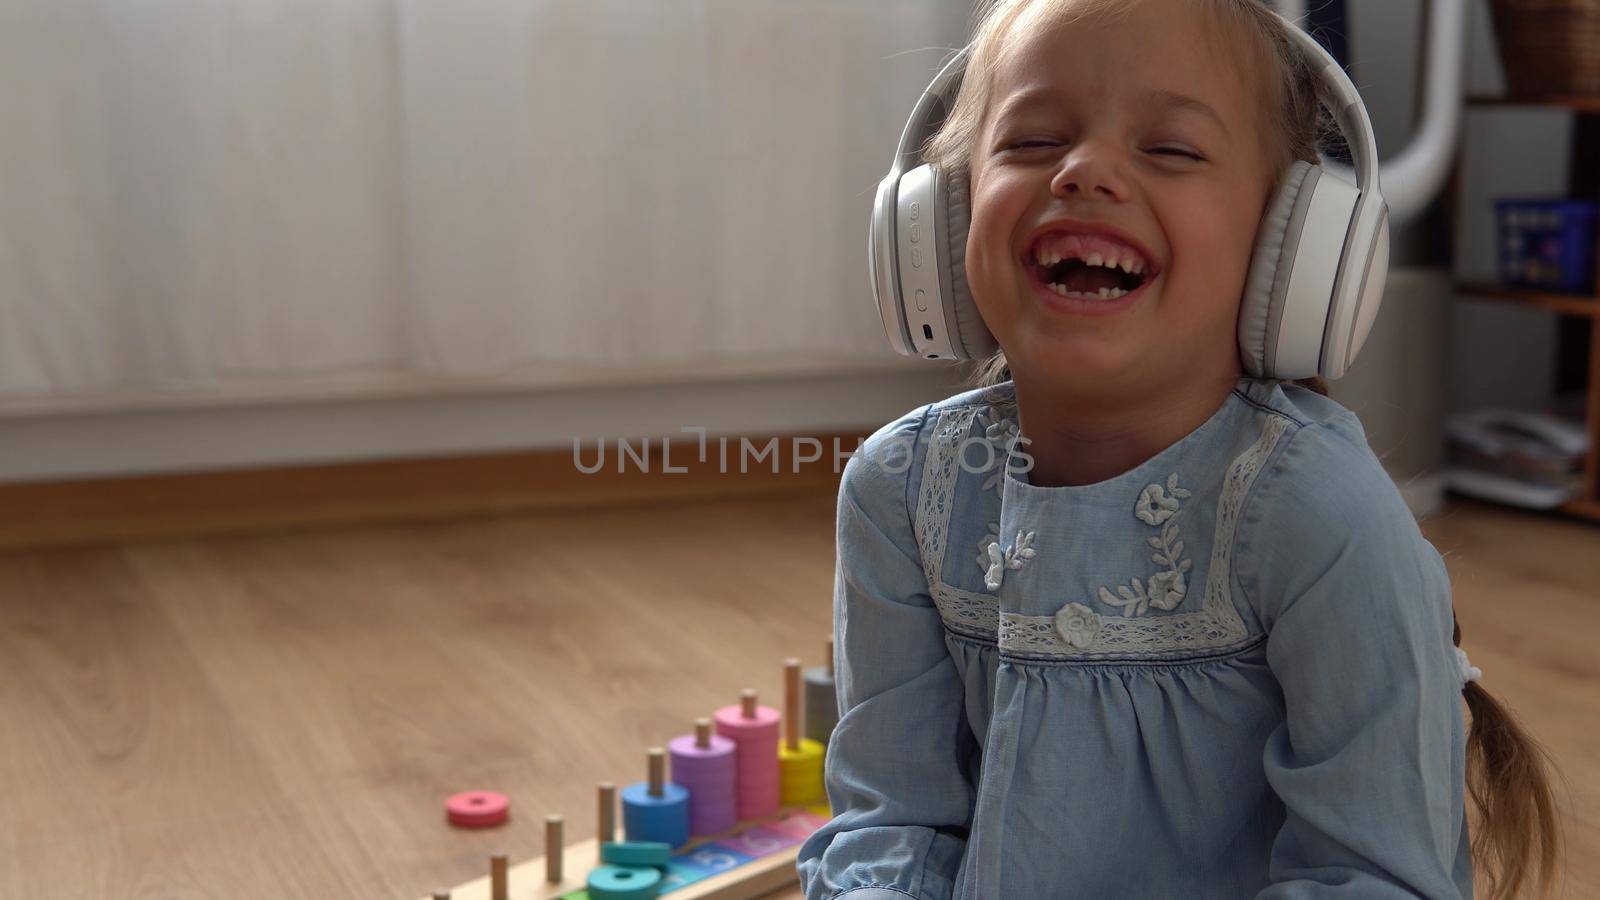 Child Listening Music In Big White Headphones. Happy Little Preschool Toothless Girl 5 Years Old Looking At Camera In Leaving Room Inside. Kid Smiles Laughs Shows Tongue At Home. Childhood, Education.